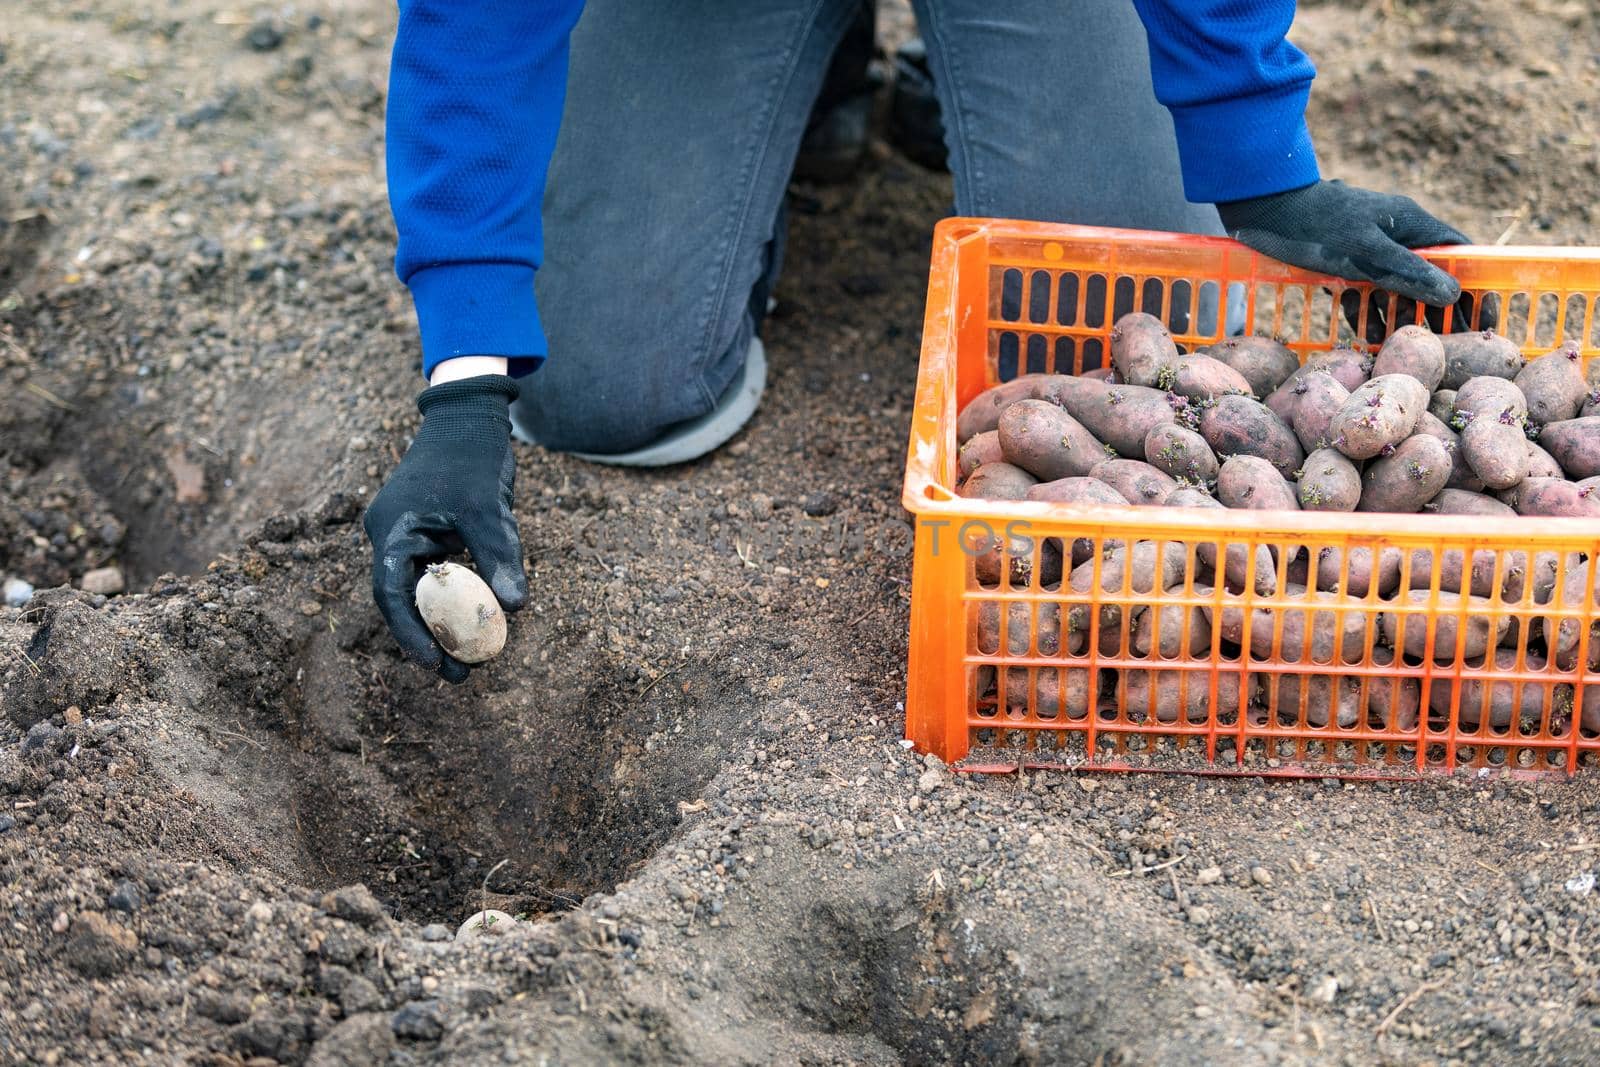 Process of seeding potato tubers into the ground by Nobilior